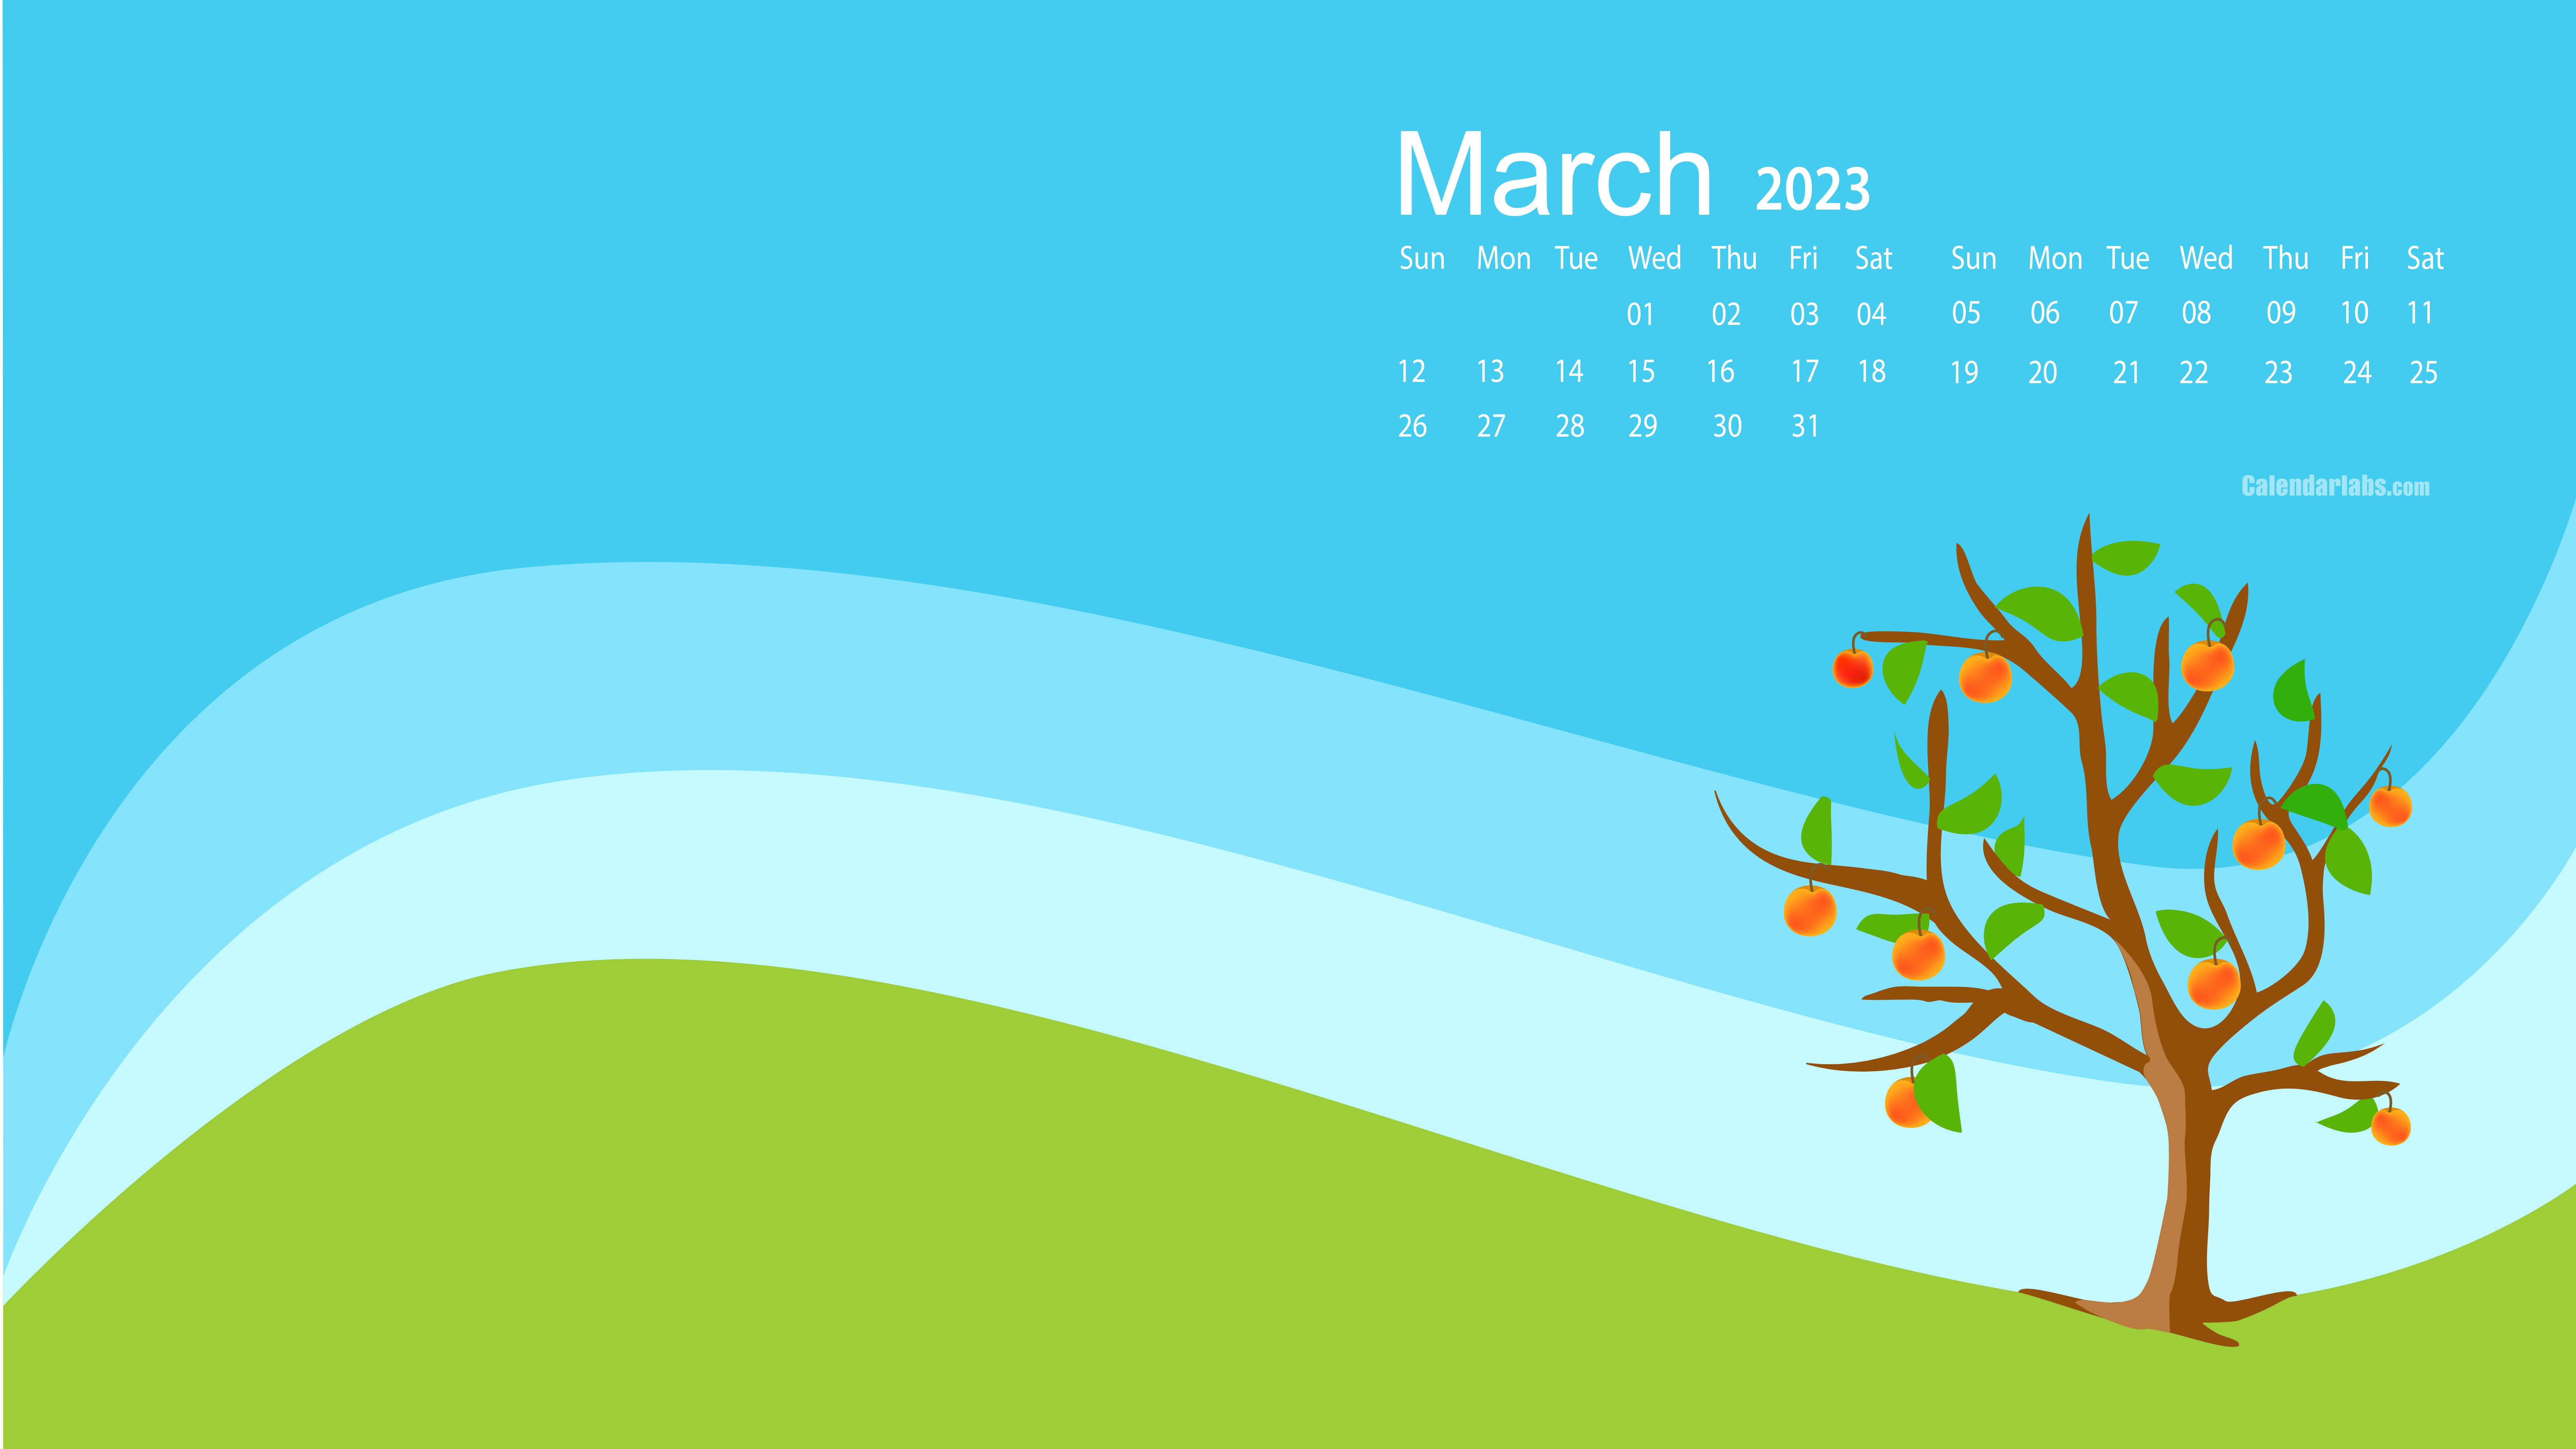 March 2023 Wallpaper for iPhone and Desktop Organizer